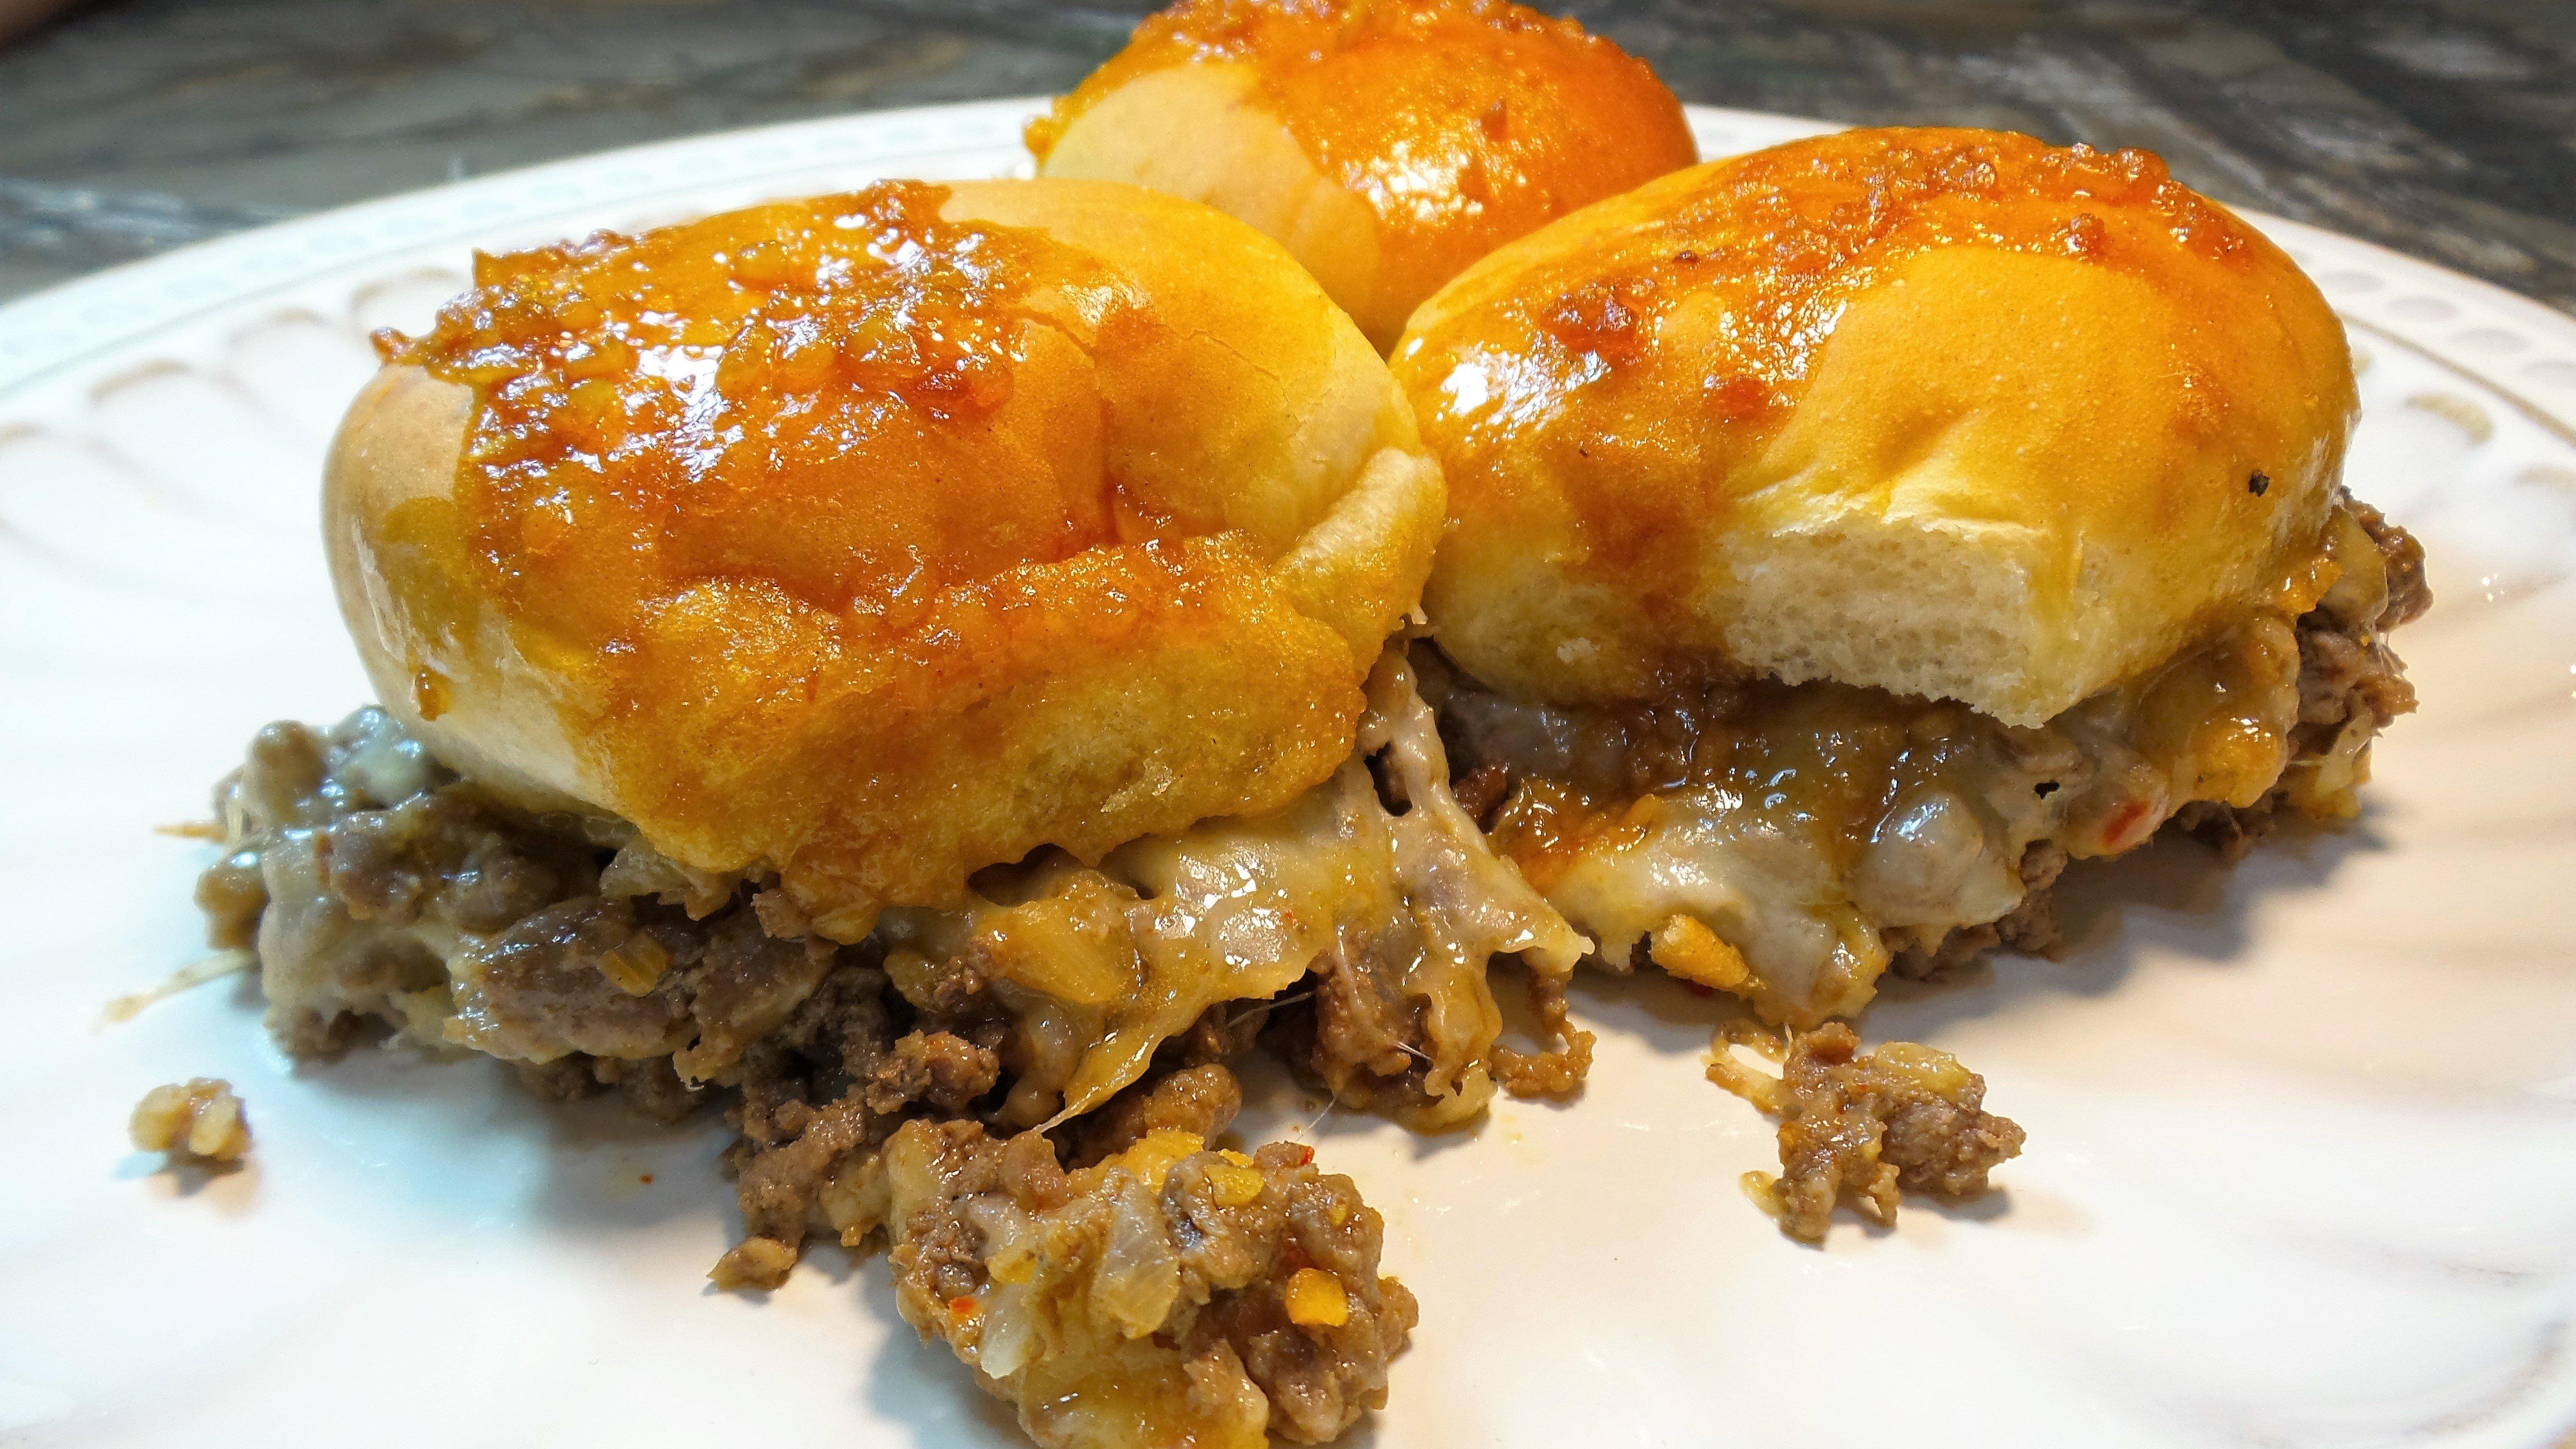 While they aren't the least messy of party snacks, loose meat sliders are always a hit.